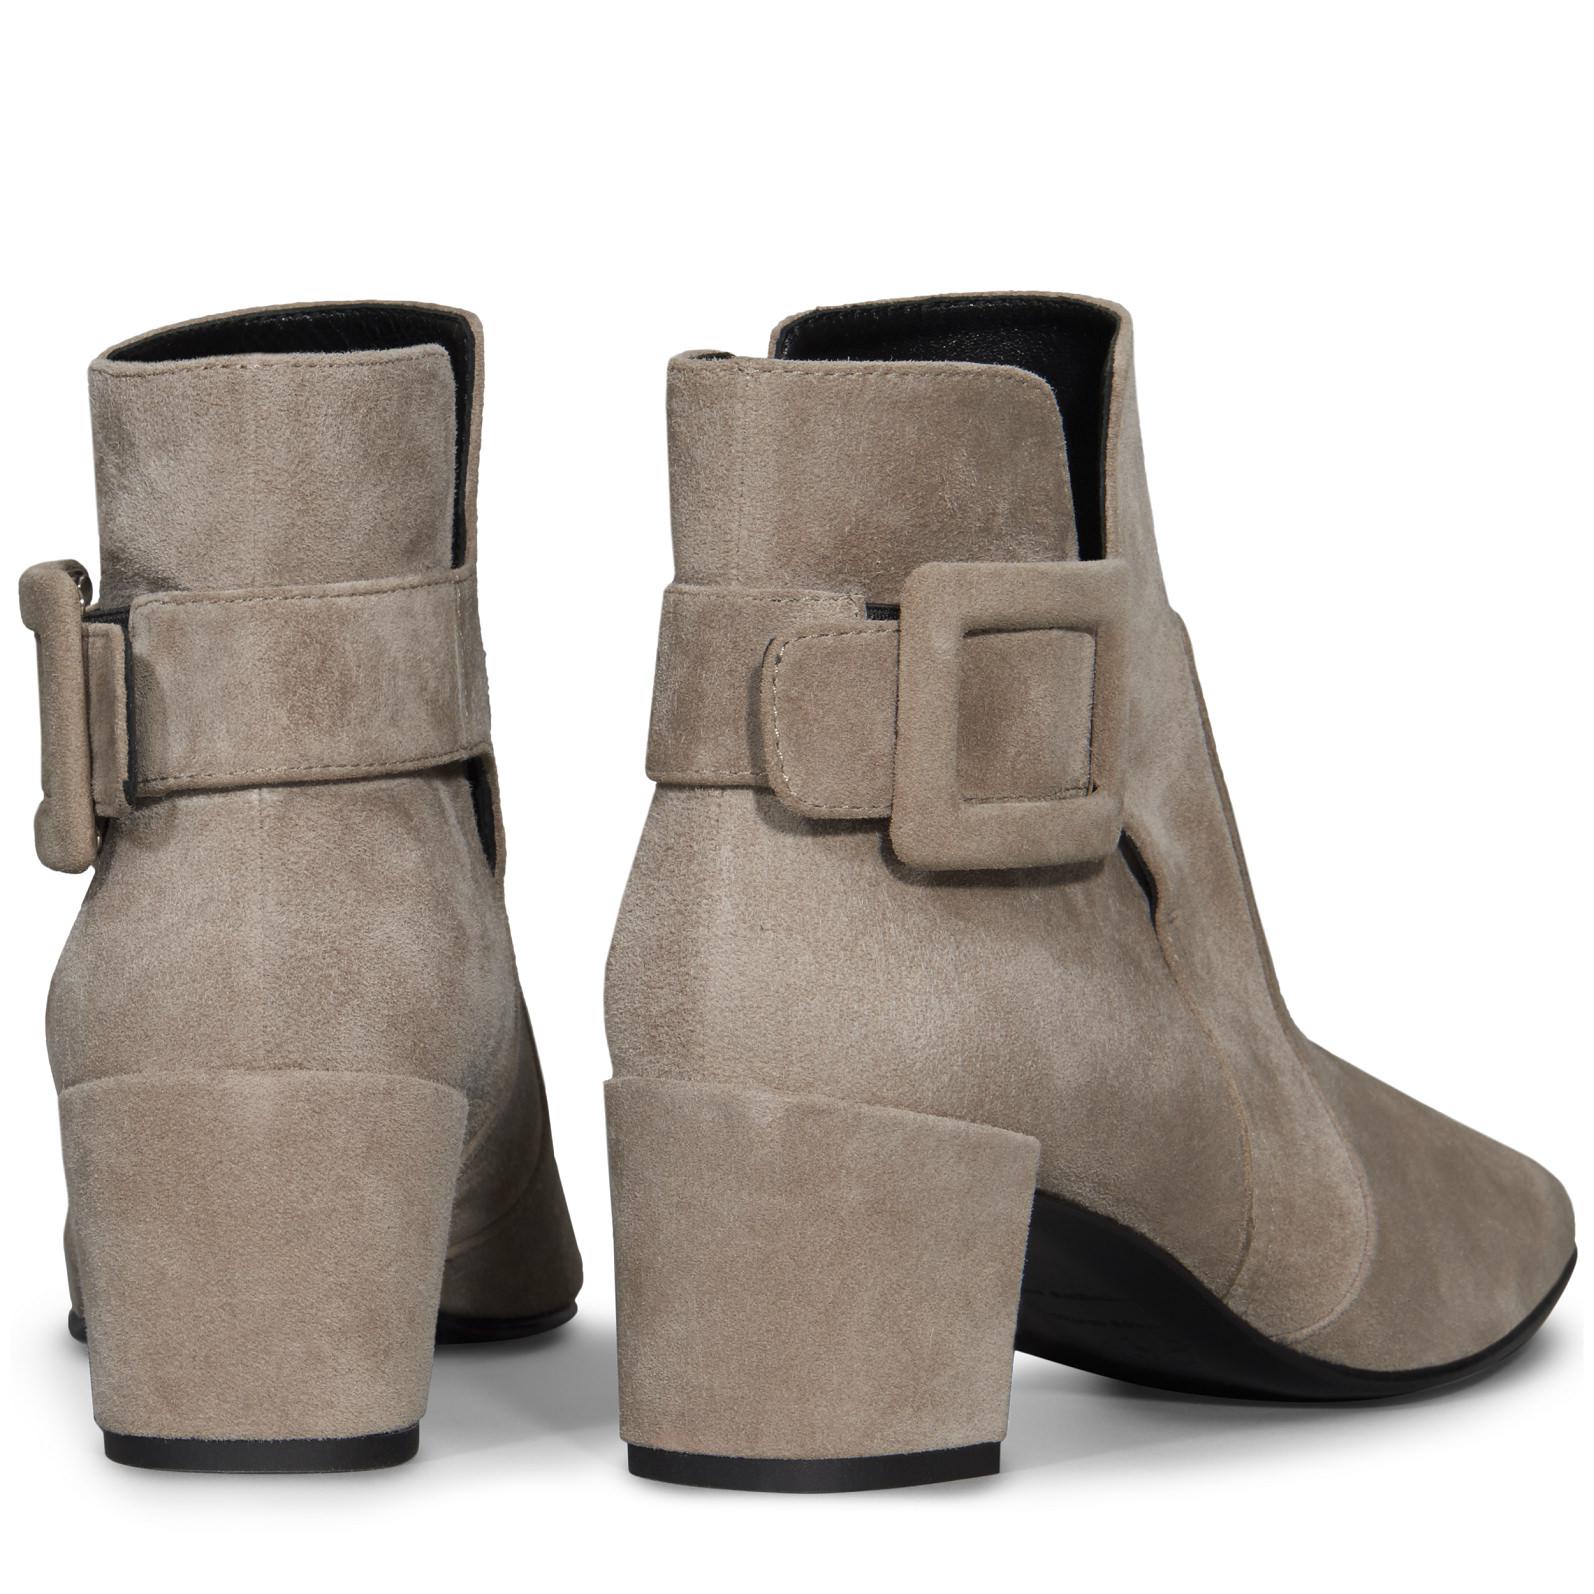 Roger Vivier Polly Ankle Boots In Suede 